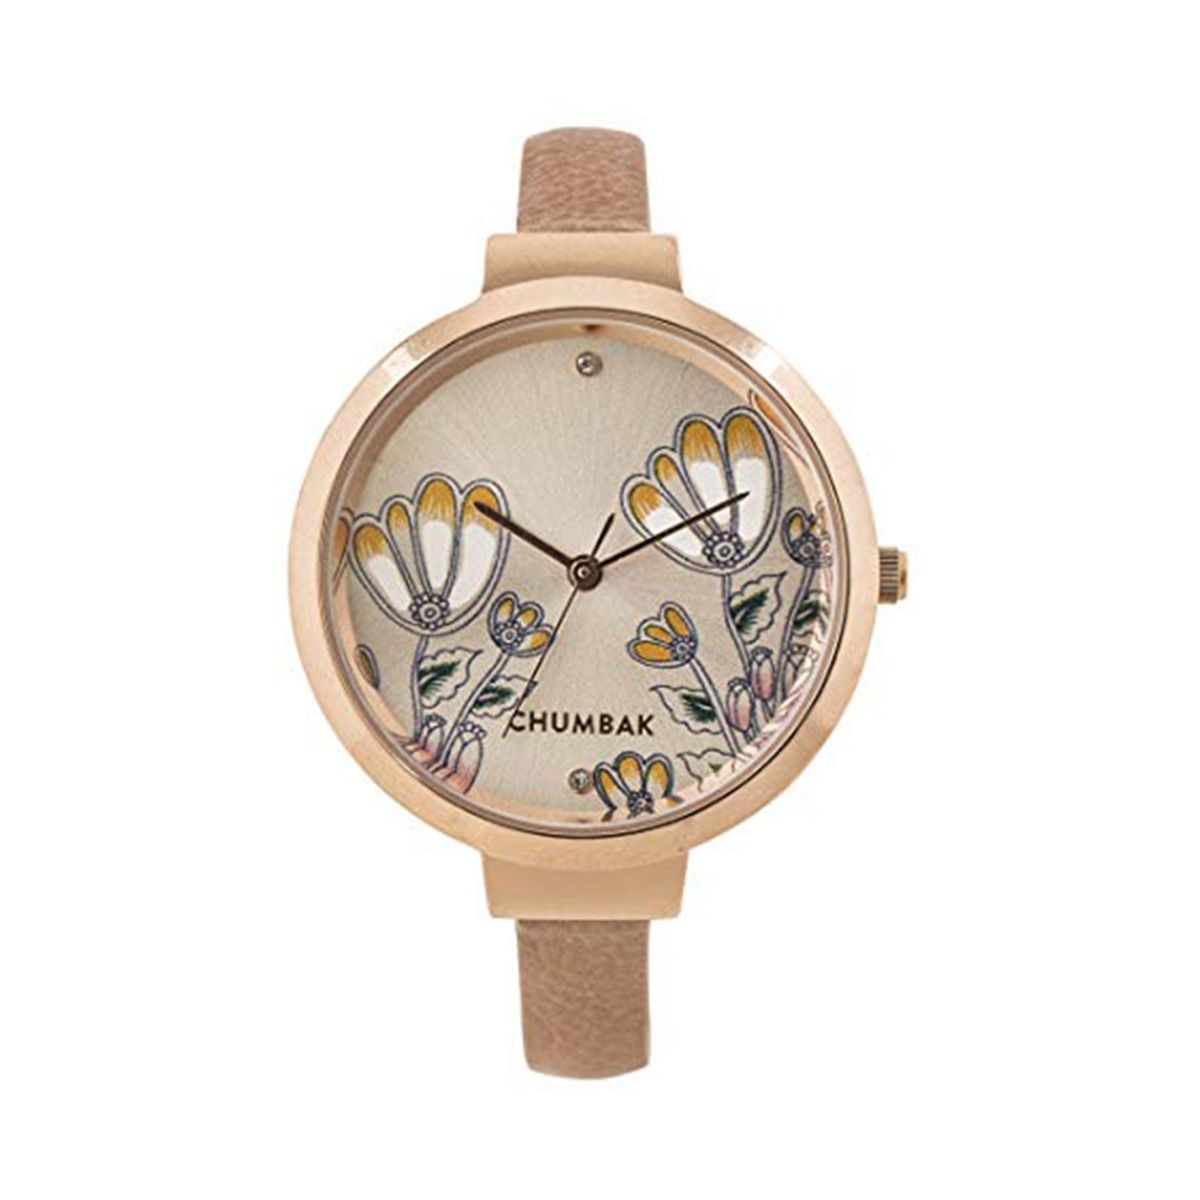 New In Box Olivia Burton Pink & Rose Gold Floral Watch 30mm Pink Leather  Strap | eBay